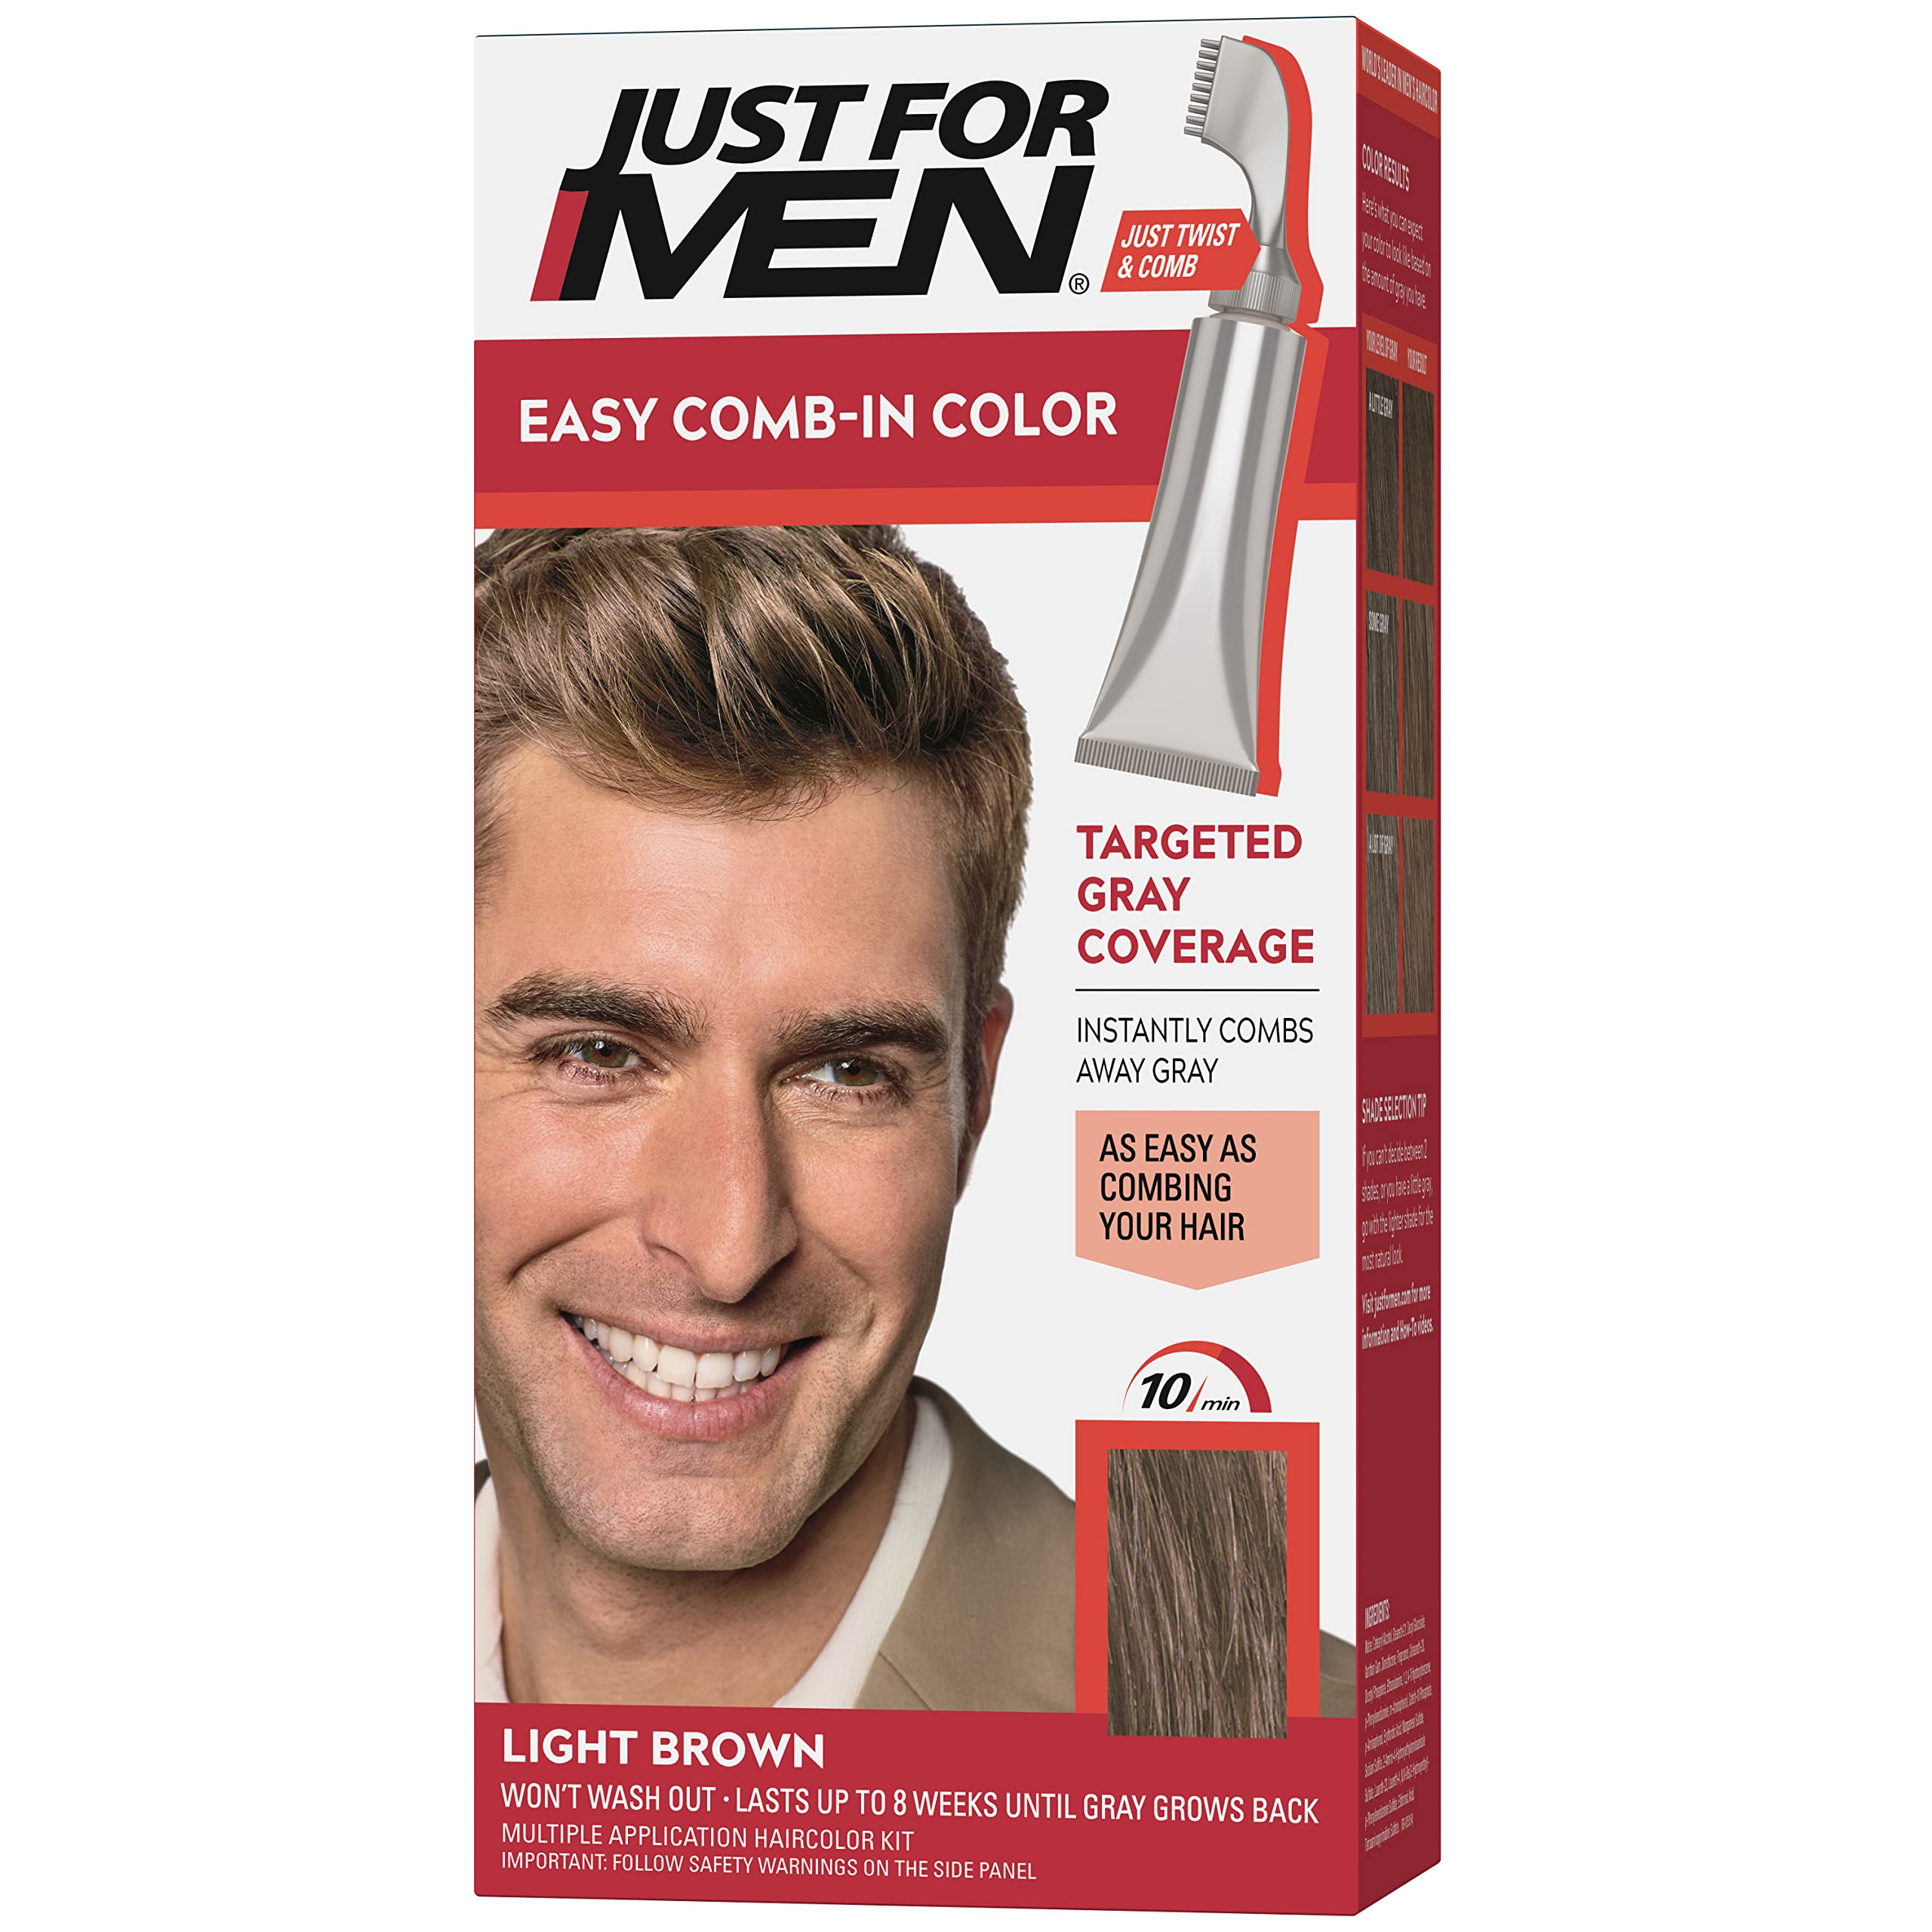 Just For Men Easy Comb-In Color Mens Hair Dye, Easy No Mix Application with Comb Applicator - Light Brown, A-25, Pack of 1